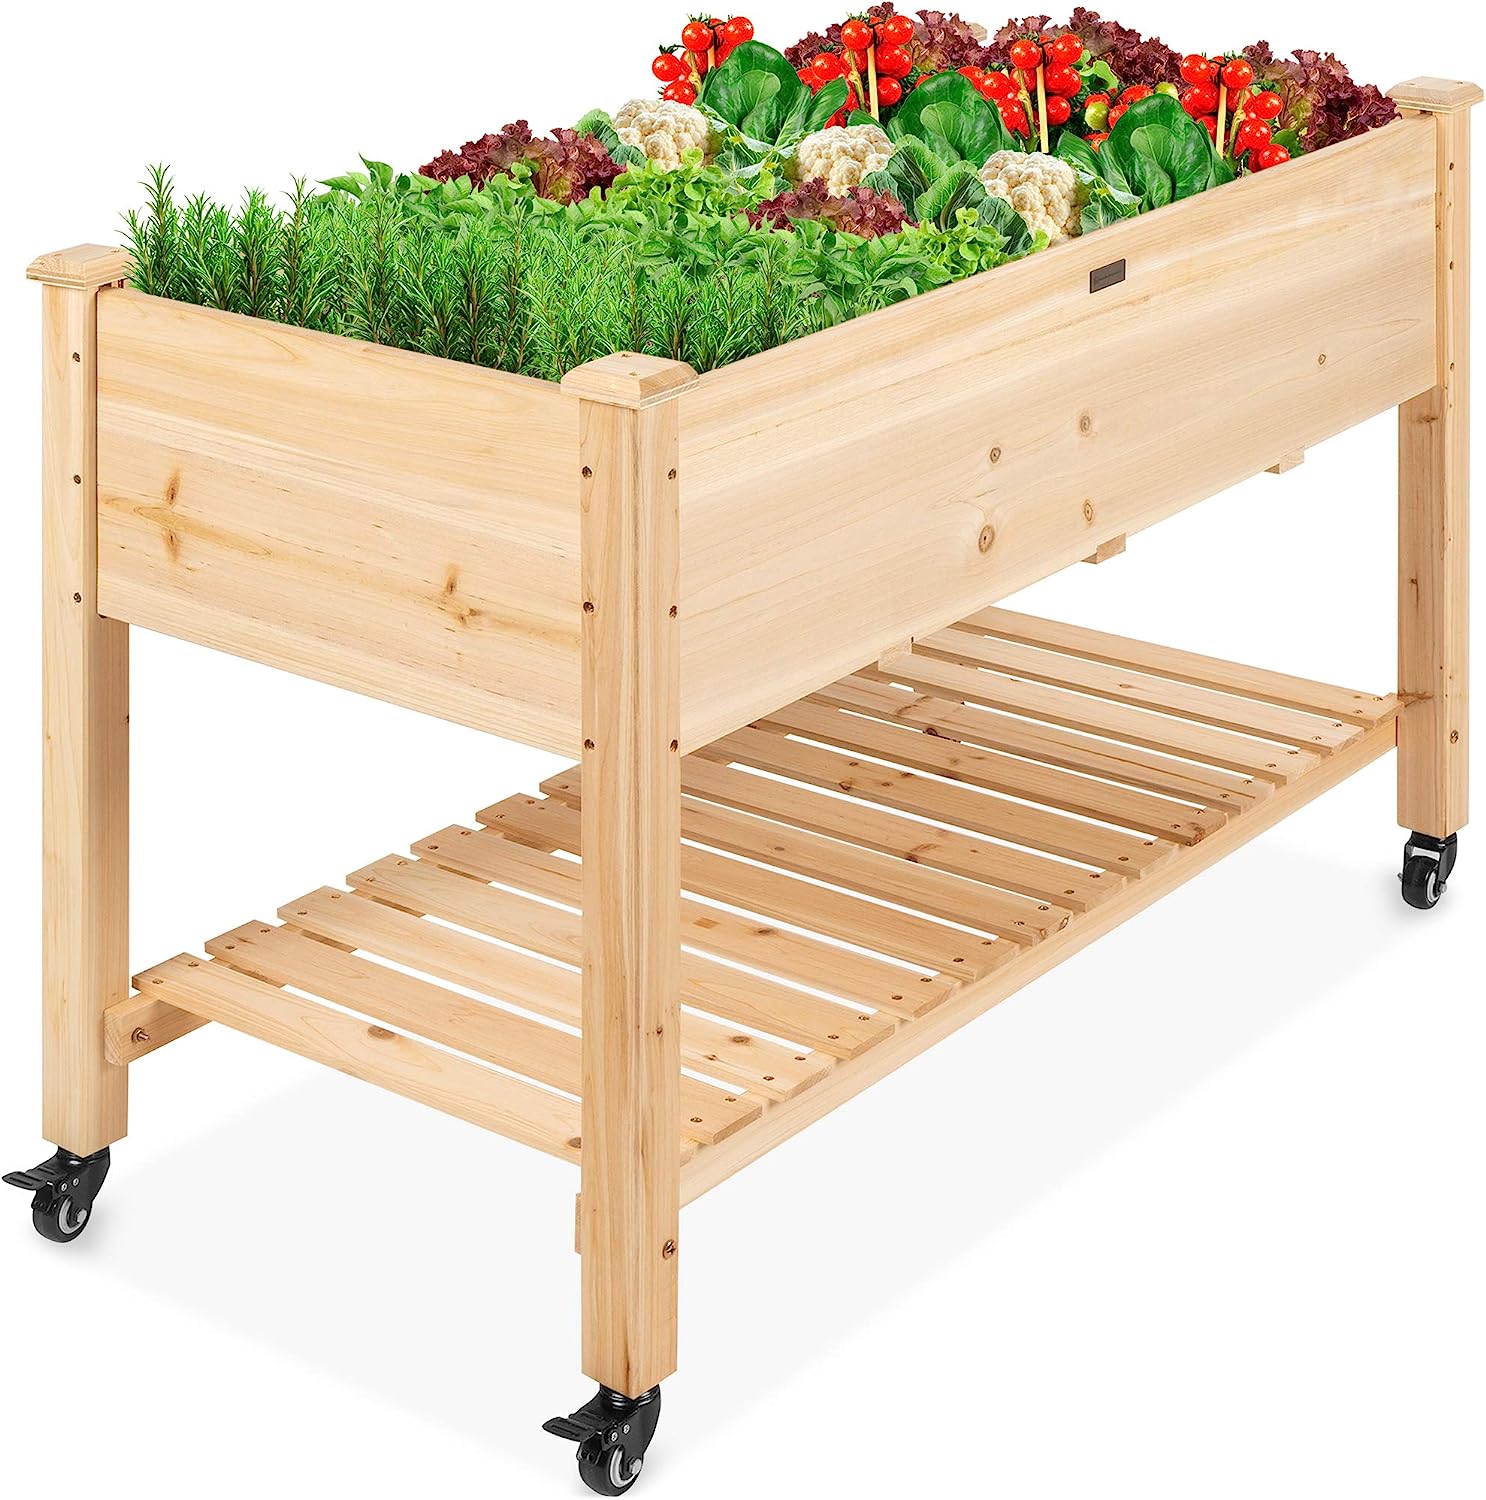 Best Choice Products Raised Garden Bed 48x24x32-inch [...]